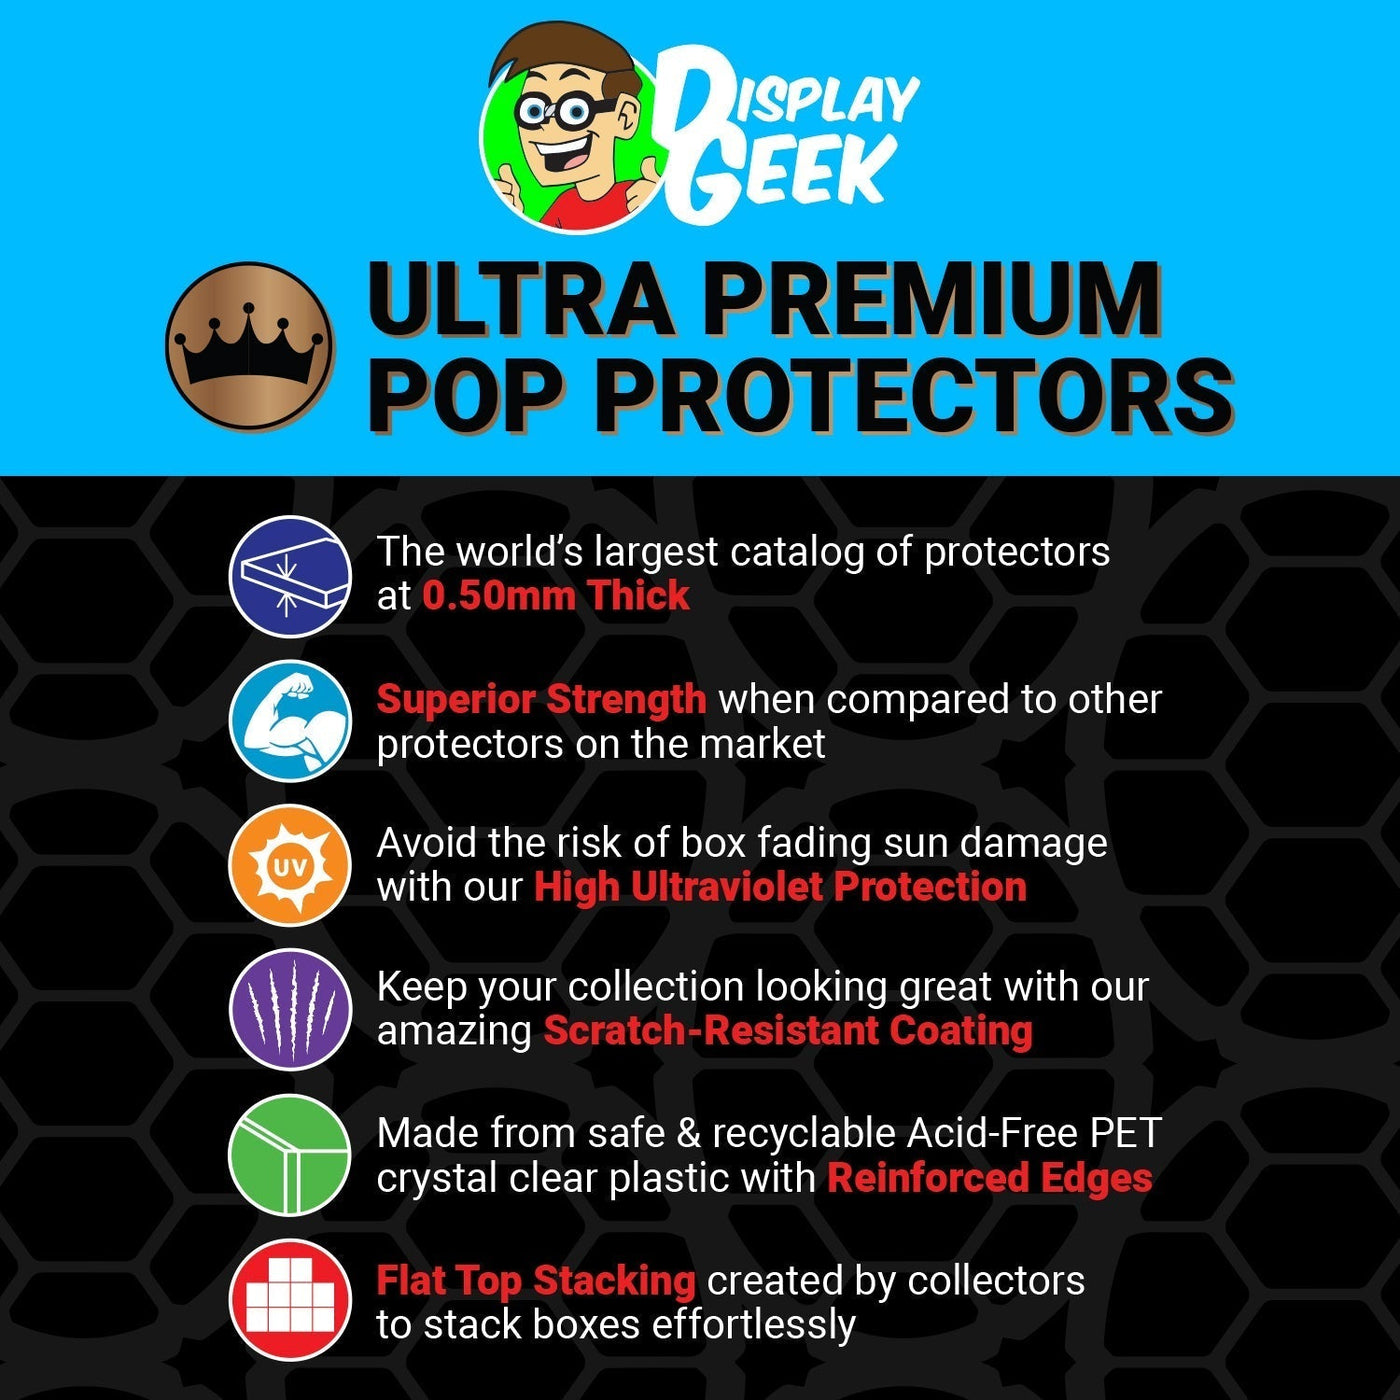 Pop Protector for Vynl 2 Pack Beast Man & Sorceress Funko on The Protector Guide App by Display Geek